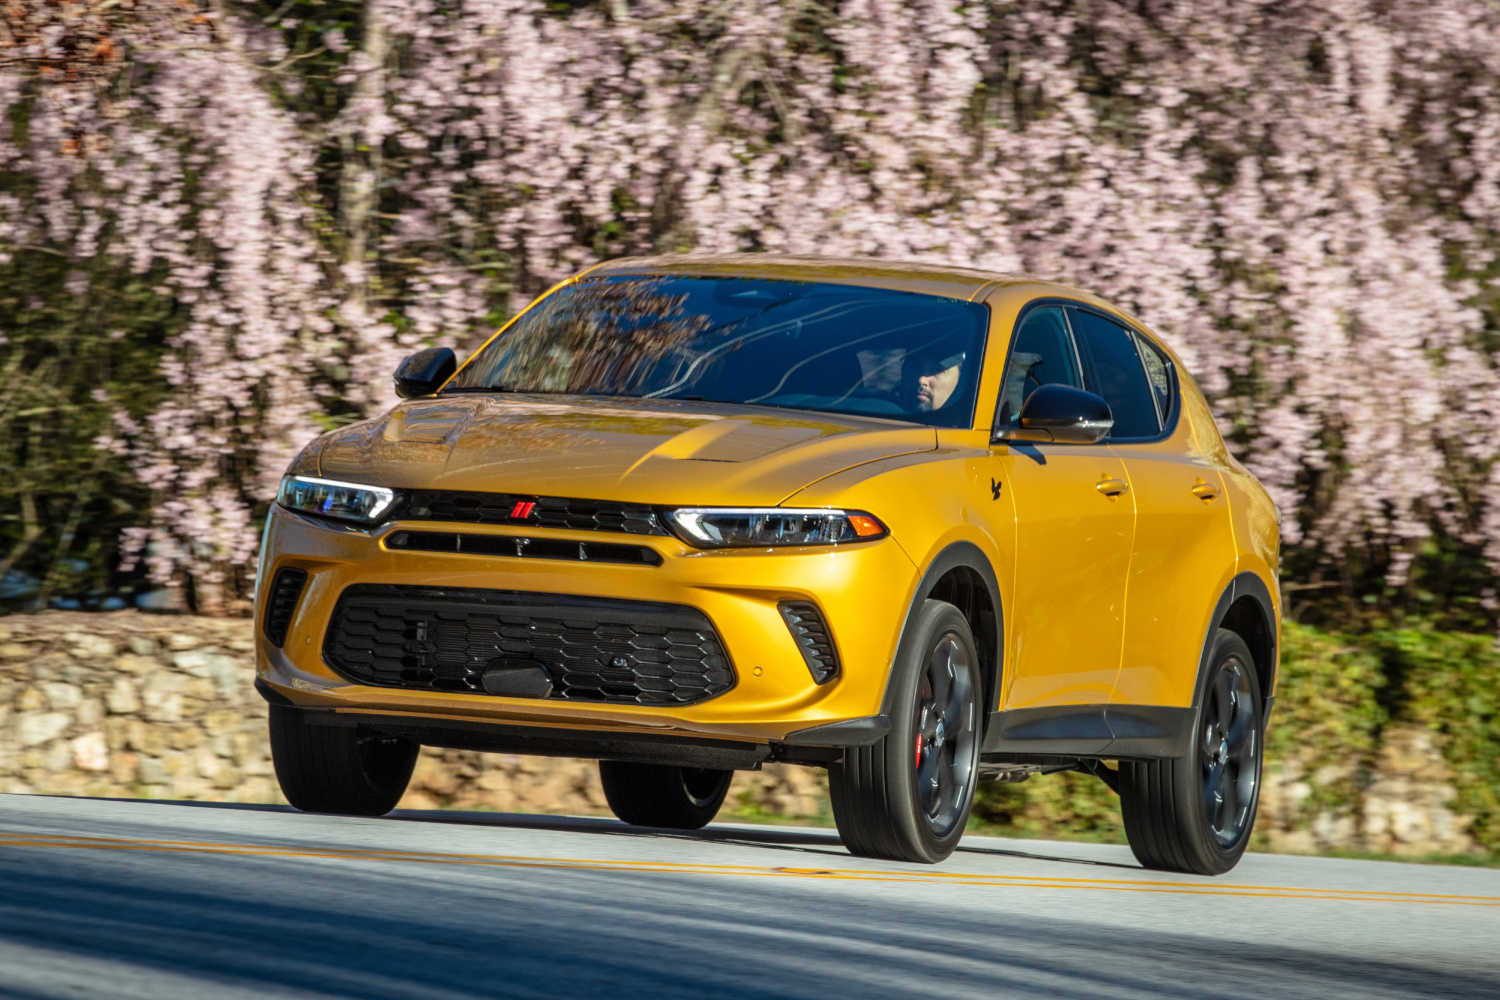 This compact SUV is the 2023 Dodge Hornet GT